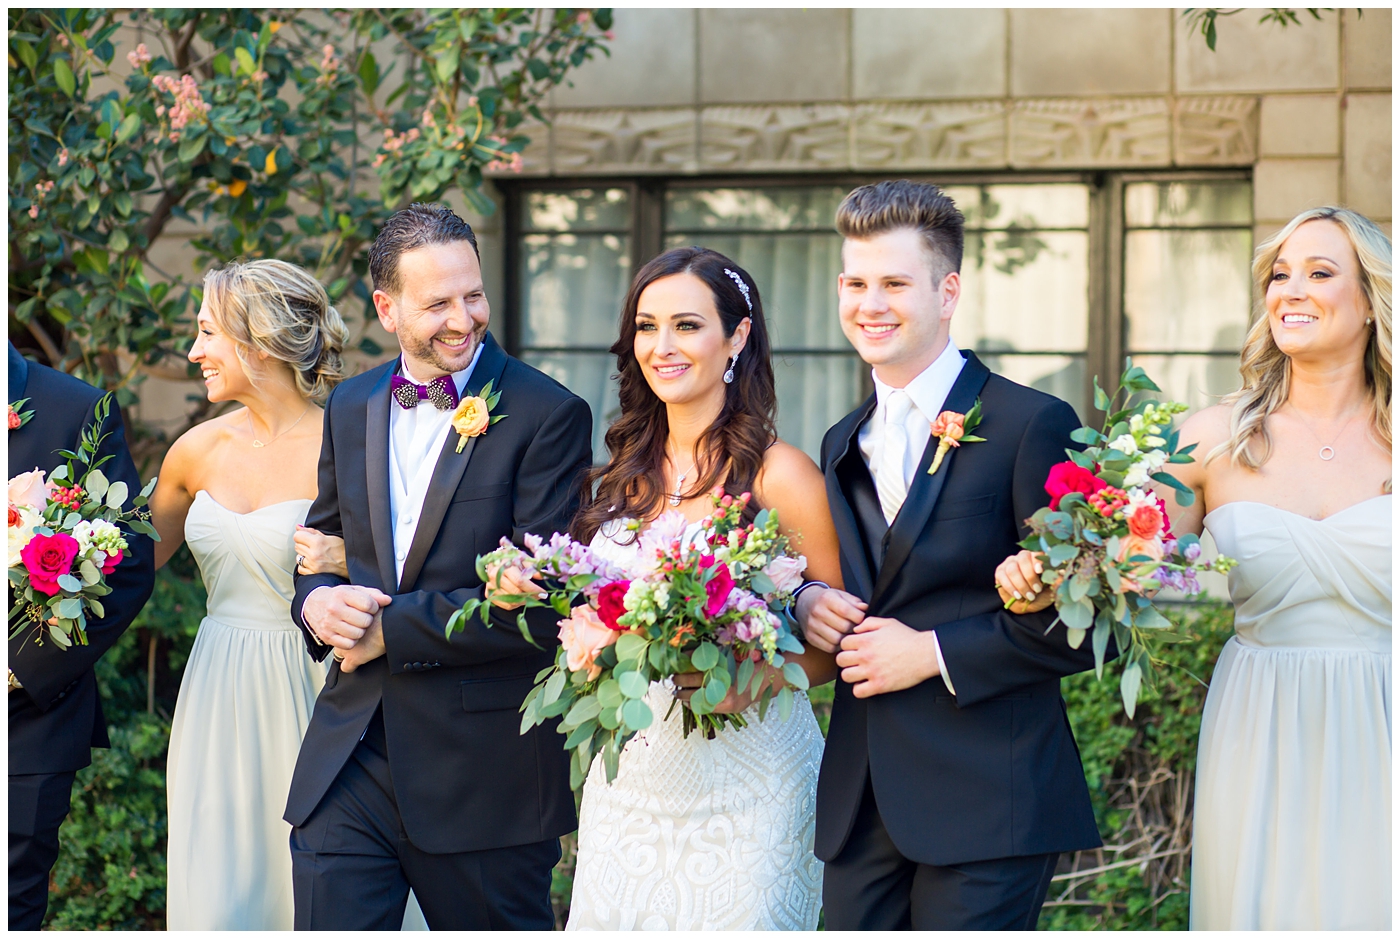 brunette bride in wedding dress with thin straps with bright color roses, dahlia, snap dragons loose bouquet with bridesmaids in champagne long dresses and groom in black suit with purple bowtie with black and white feather with orange peony boutonniere with groomsmen with white ties wedding day bridal party portrait